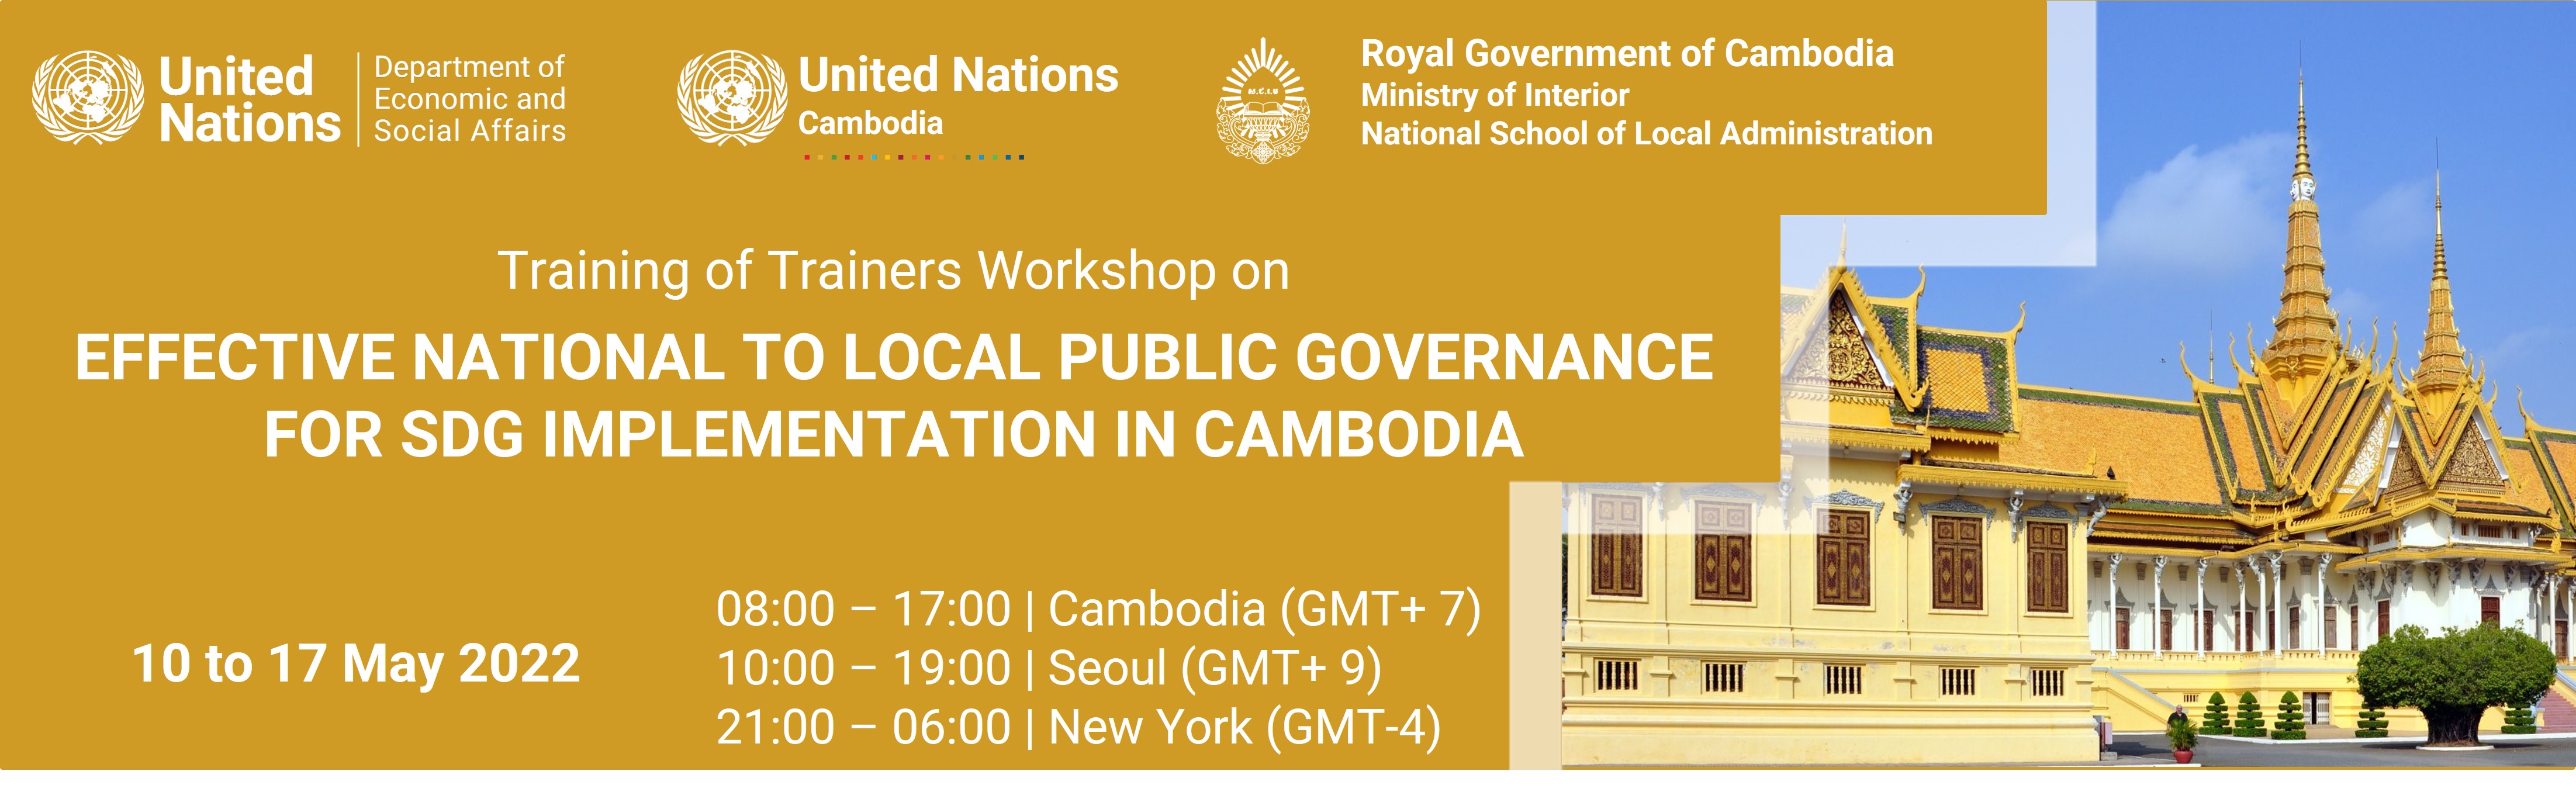 Training of Trainers Workshop on Effective National to Local Public Governance for SDG Implementation in Cambodia (May 10-17, 2022)